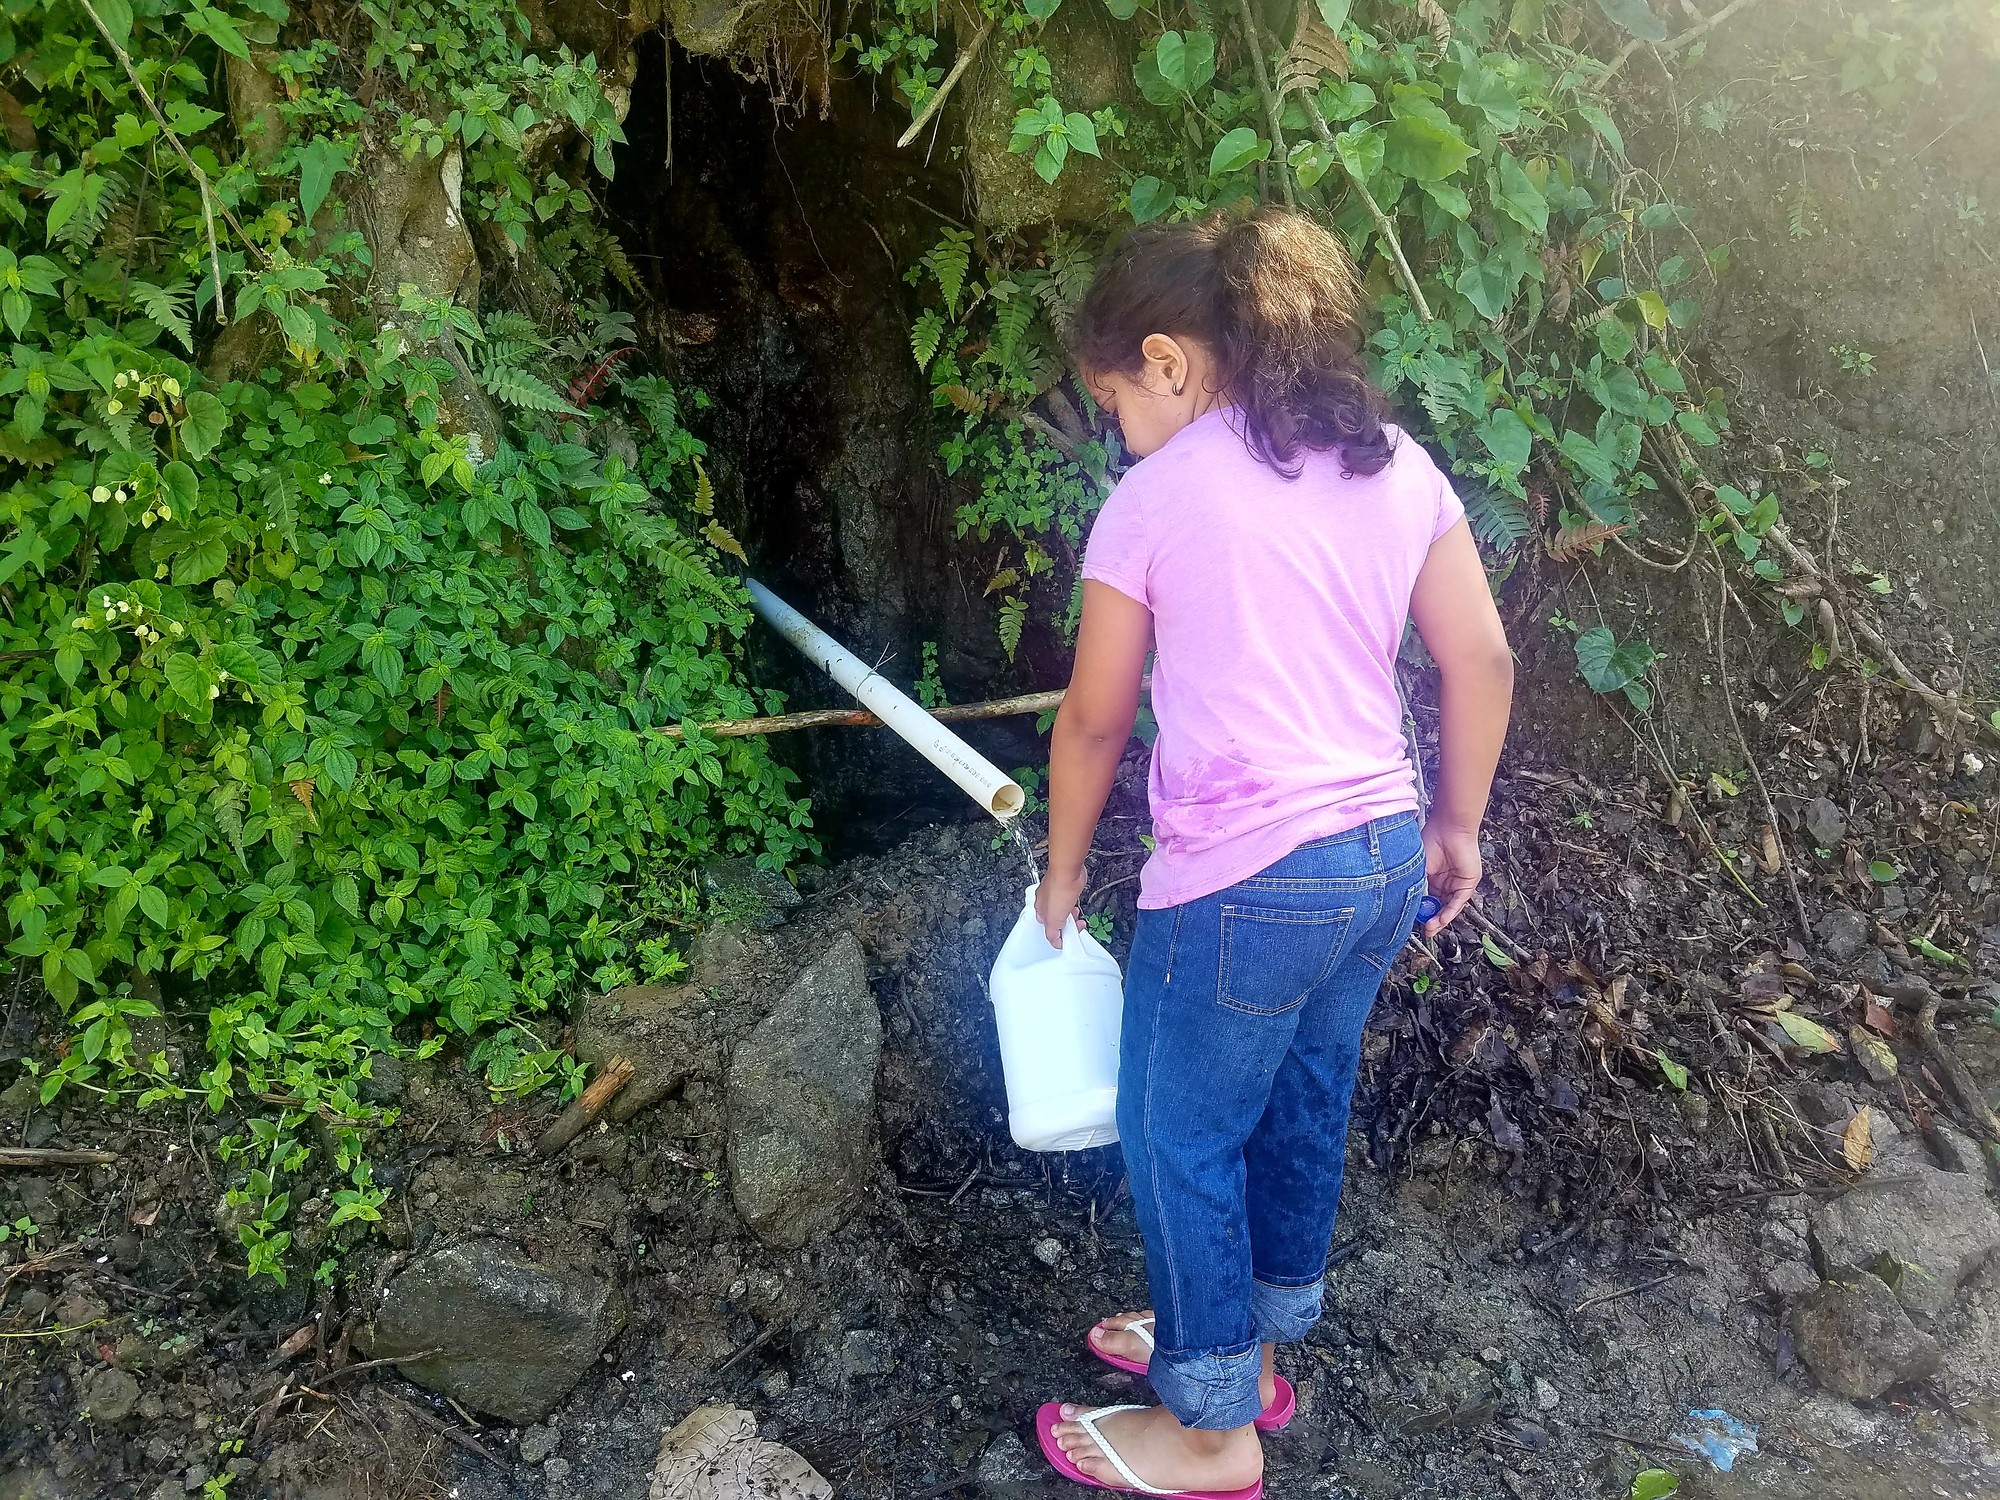 A woman in a pink shit and blue jeans fills a white jug with water from a white PVC pipe sticking out of a rocky hillside with green vines.